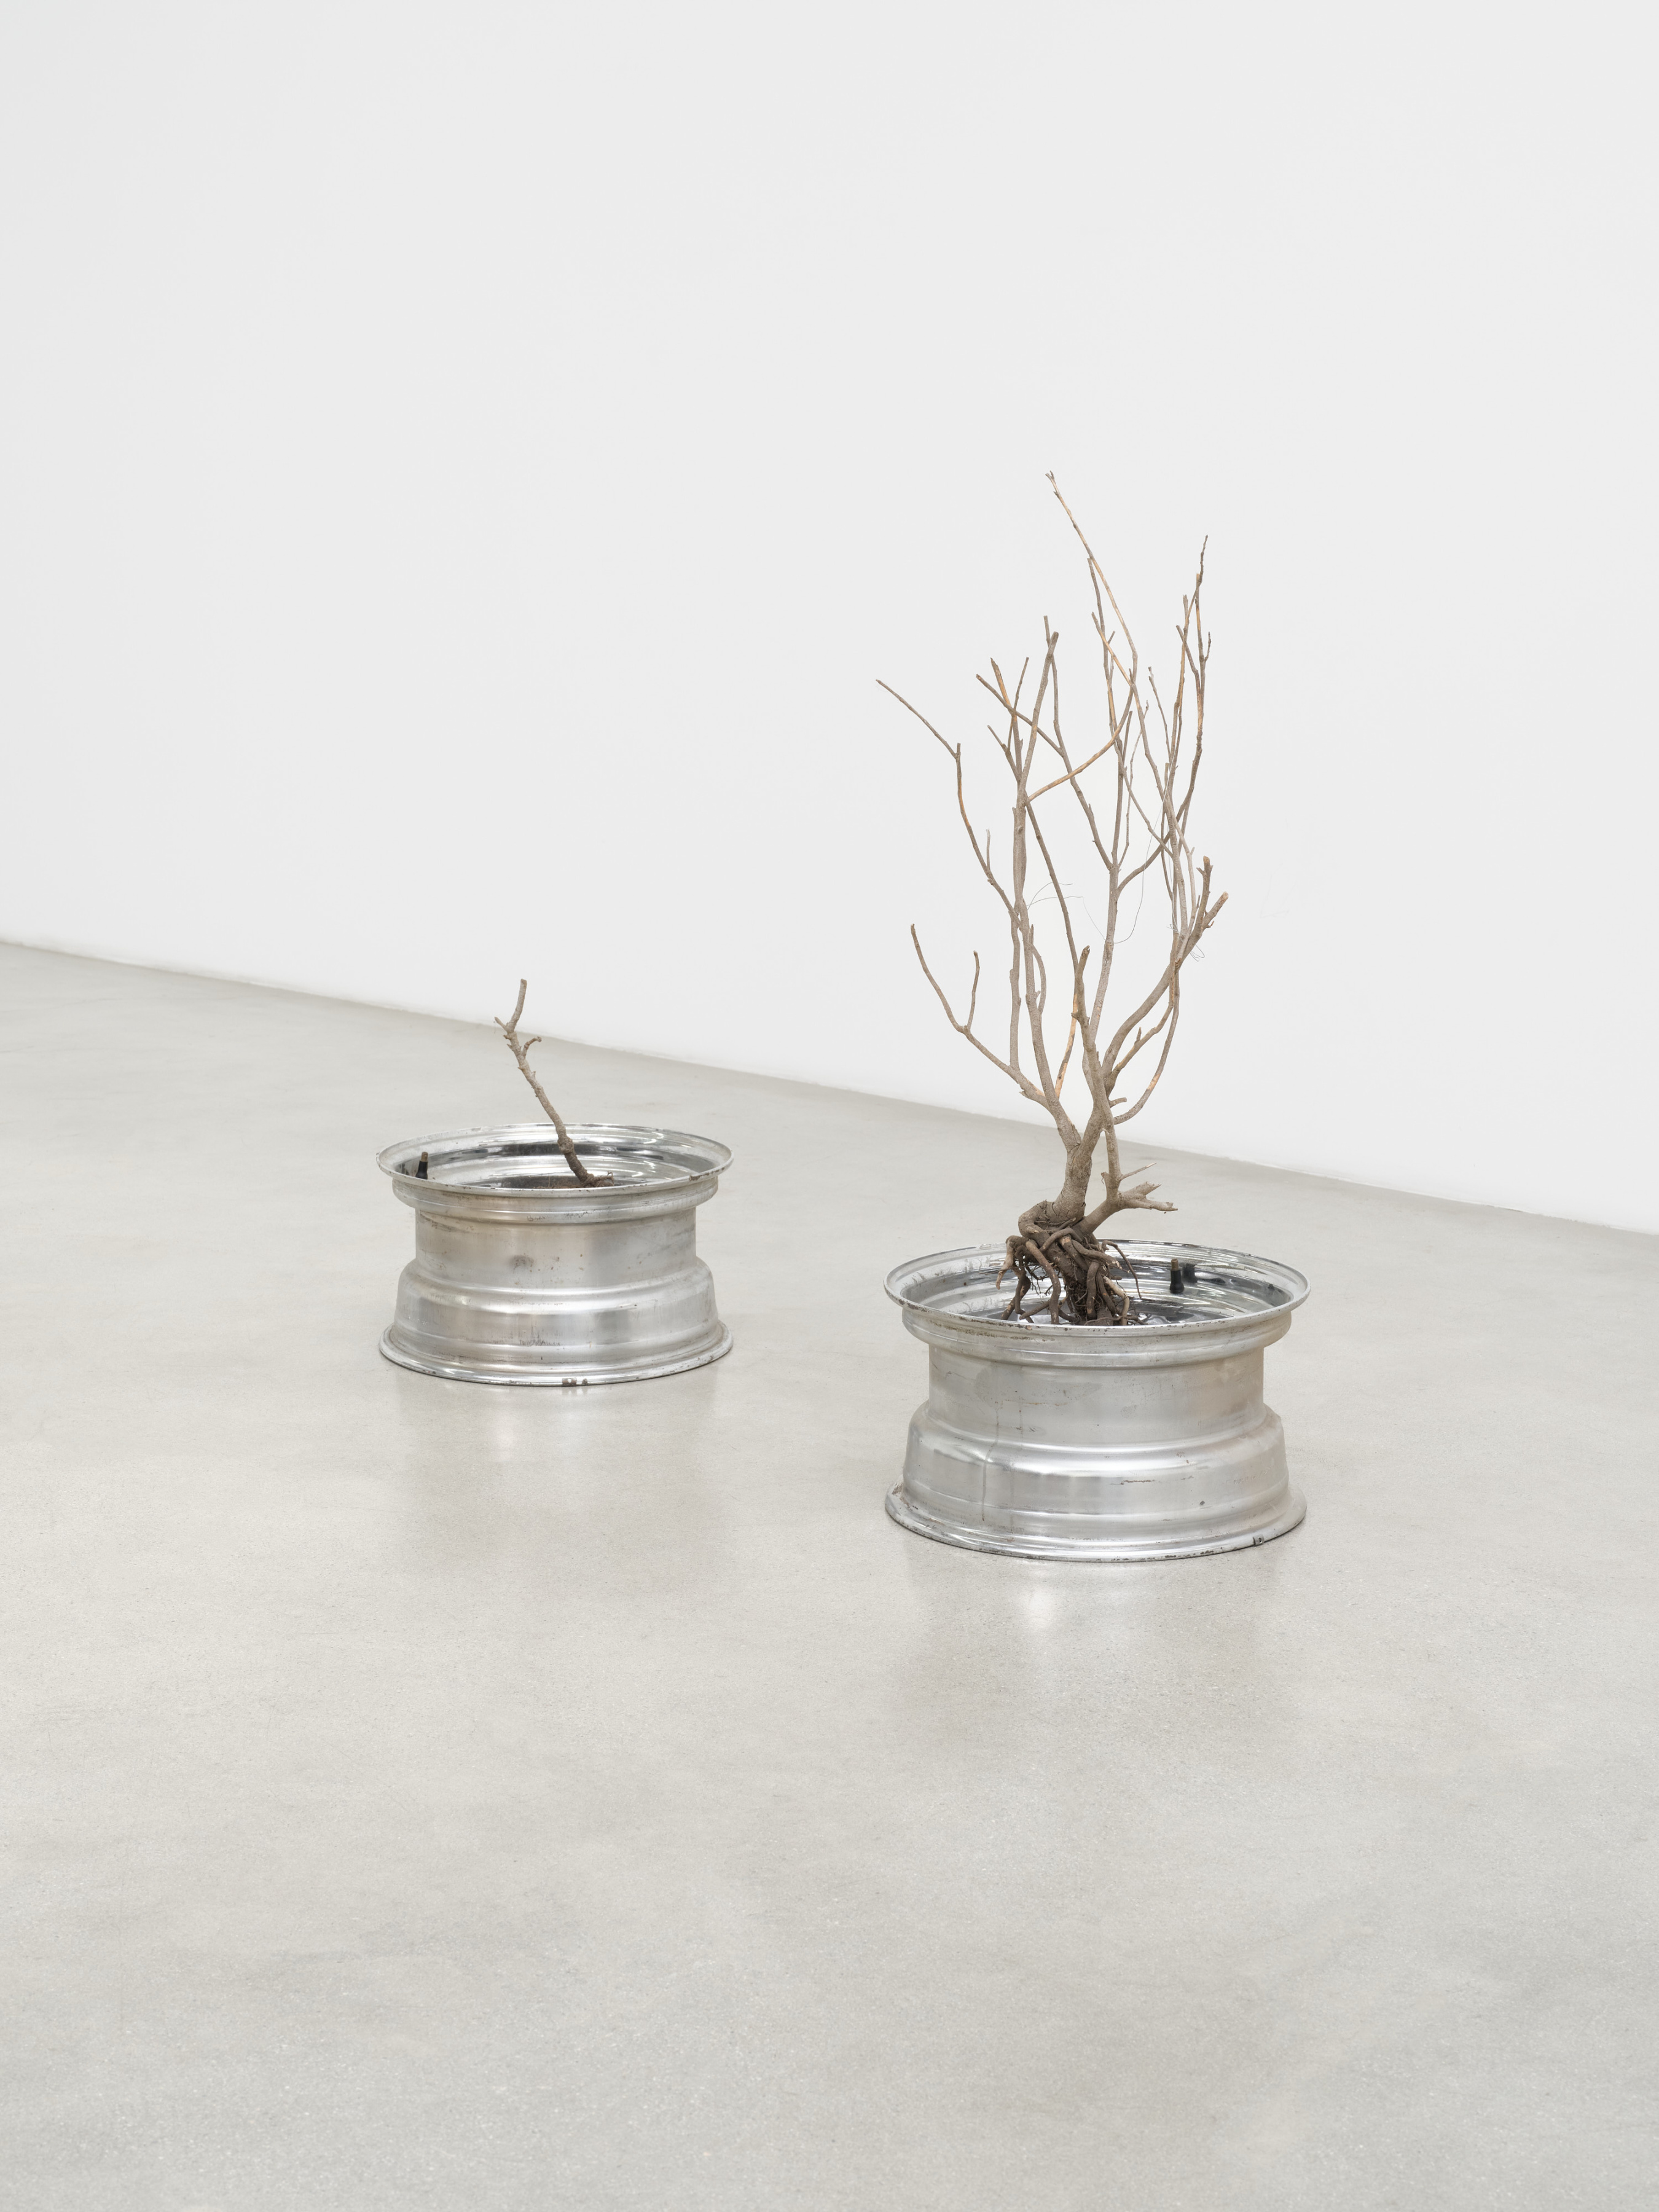 A diptych sculpture of two shining silver hubcaps lain on their side with rooted dead shrubs mounted inside. 